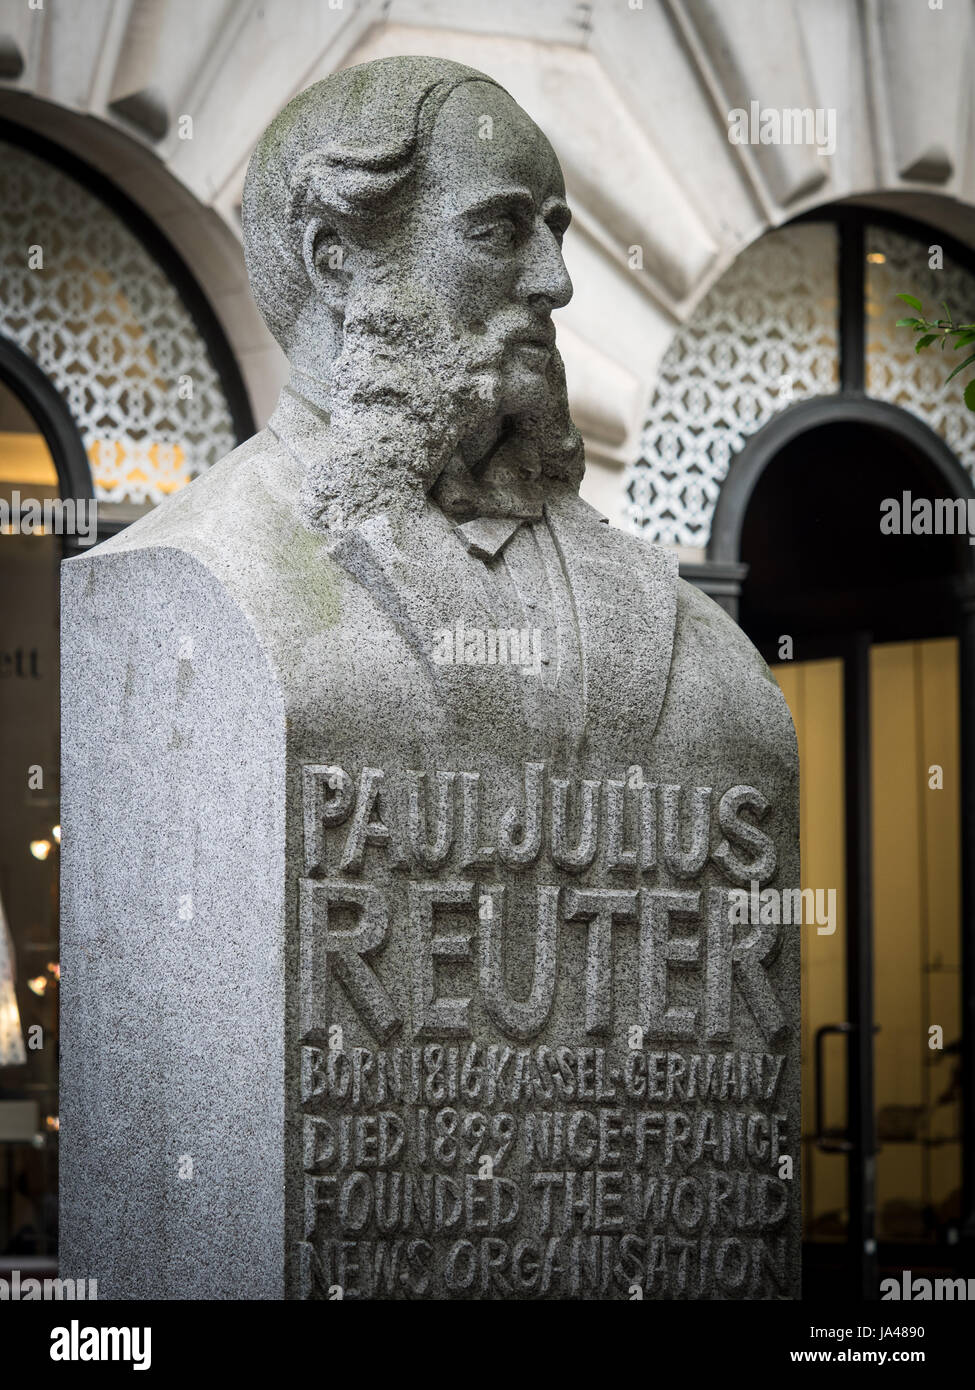 Bust of Paul Julius Reuter near the Royal Exchange in the City of London. Pioneer of telegraphy and journalism, he founded the Reuters News Agency. Stock Photo